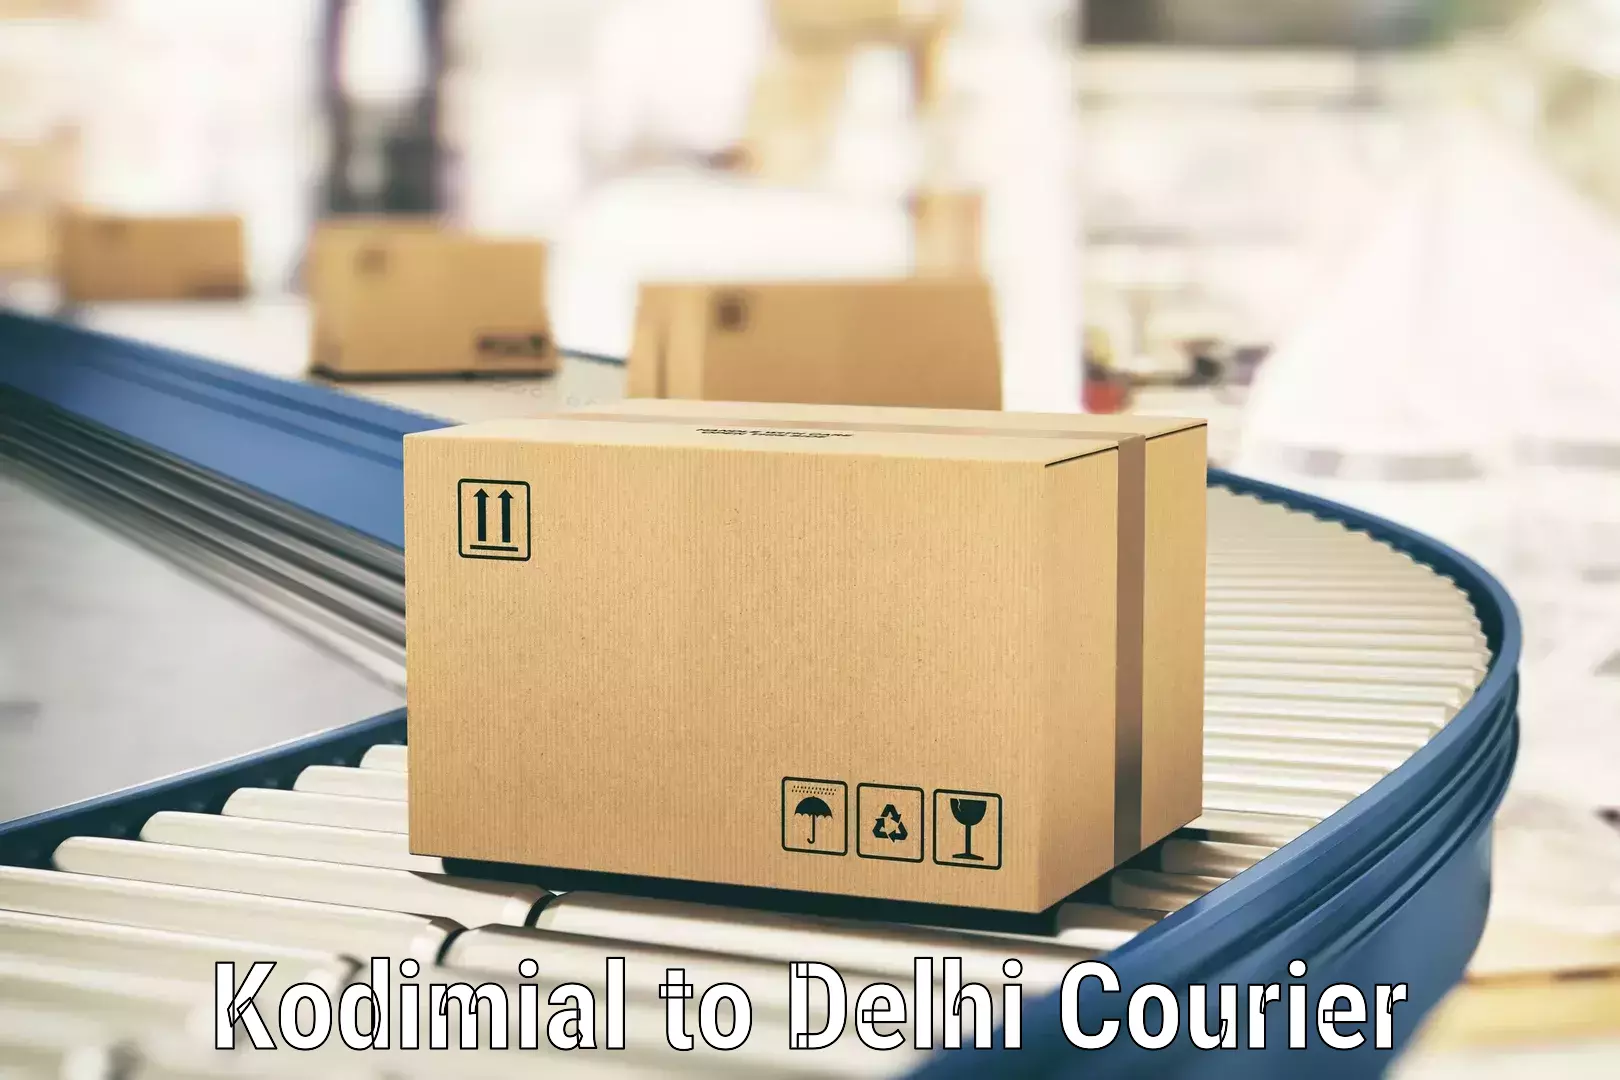 High value parcel delivery in Kodimial to Lodhi Road